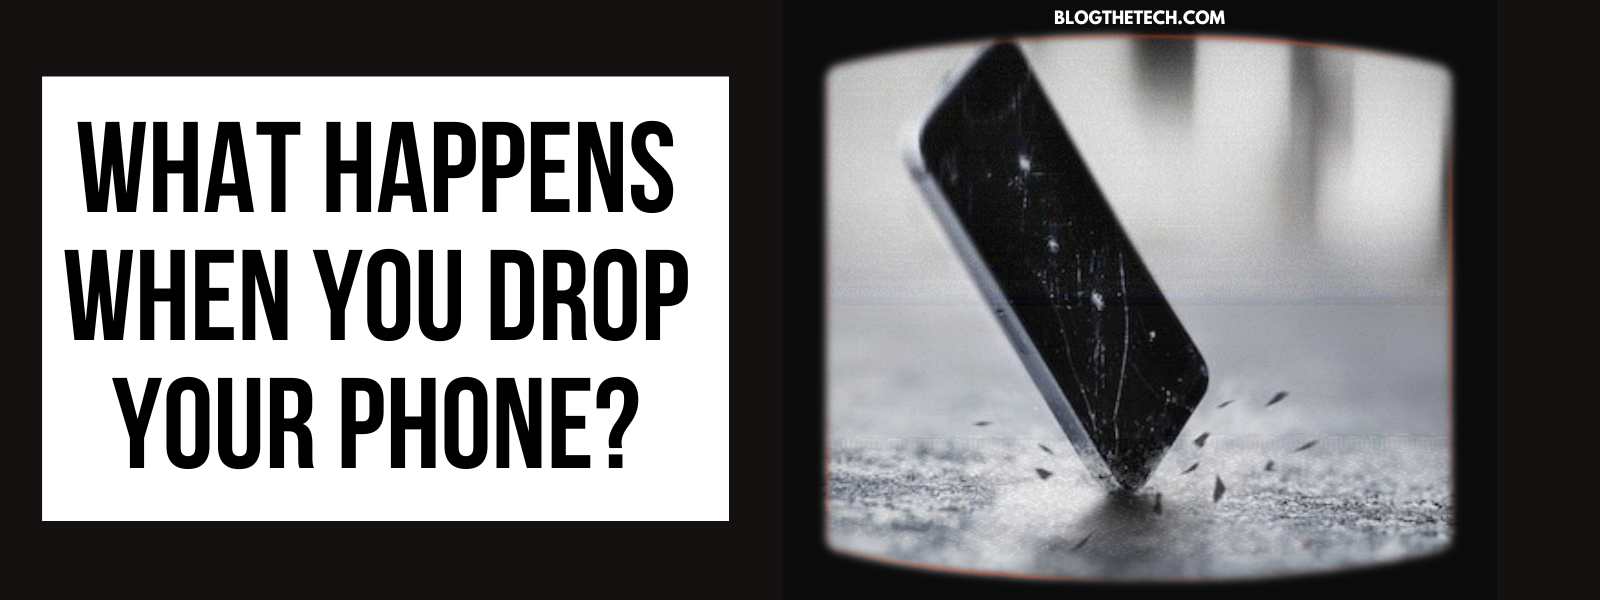 What Happens When You Drop Your Phone?